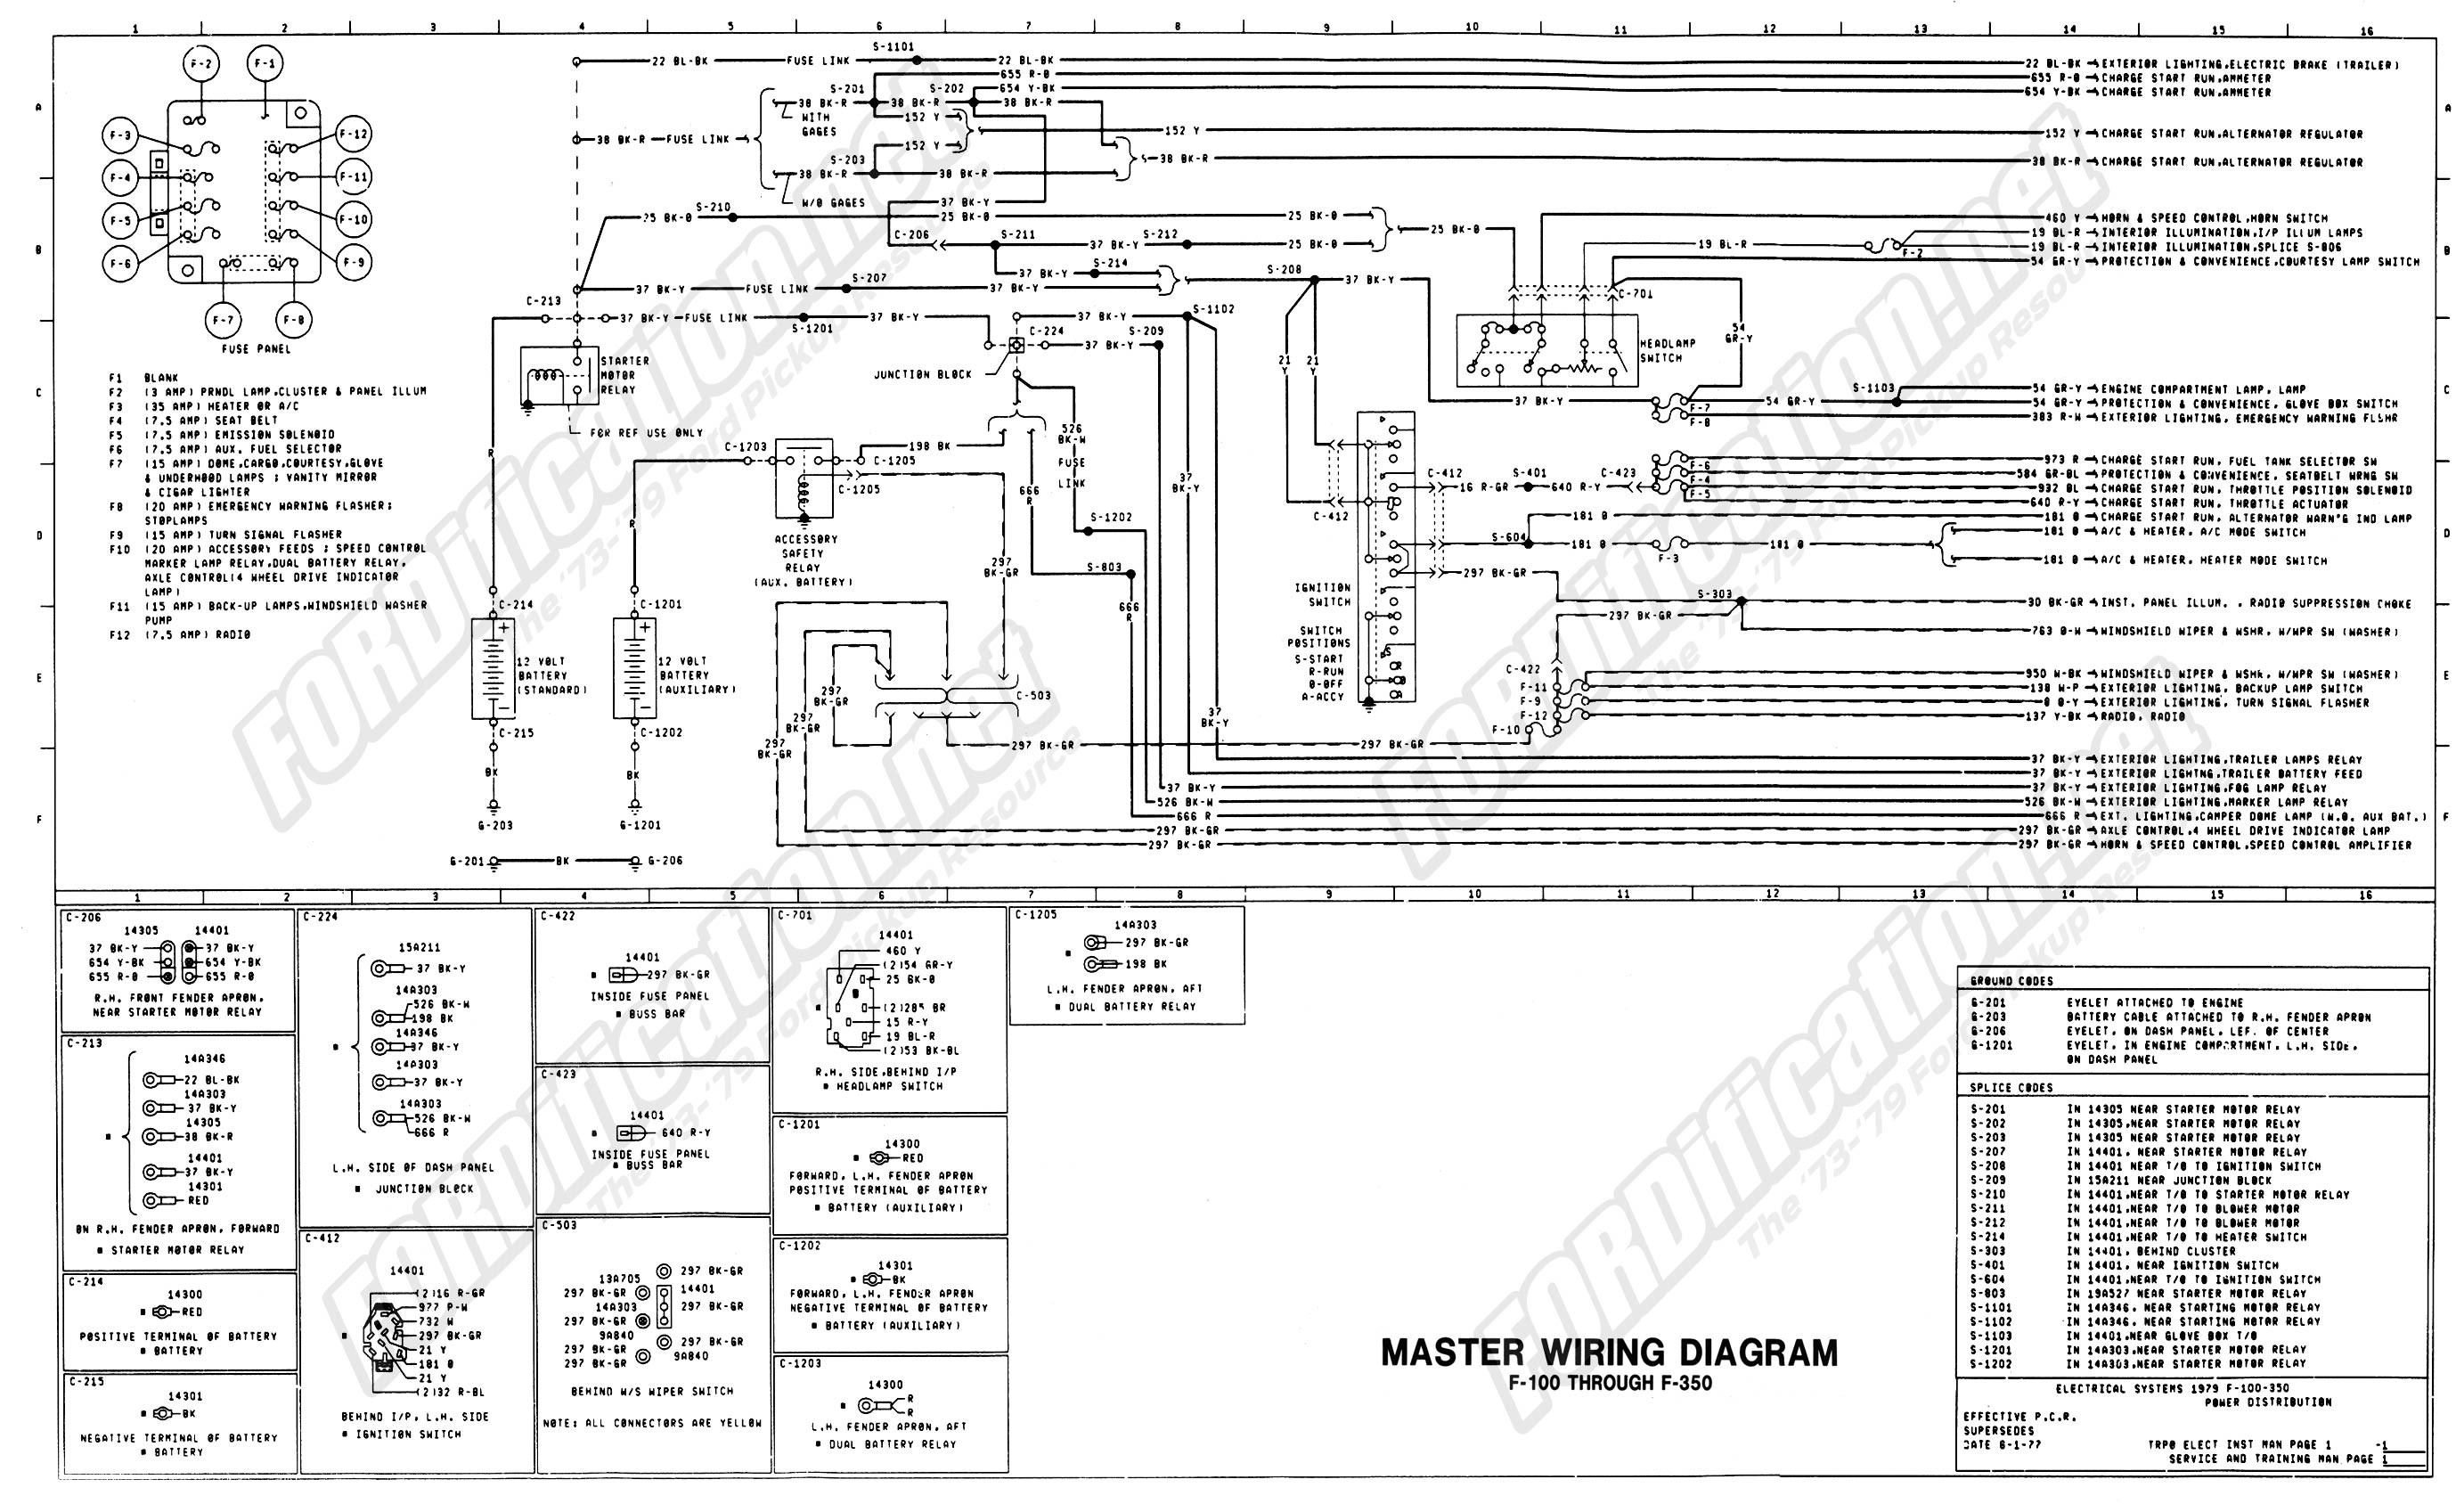 Diagram Wiring Manual Used Ford Truck Wiring Fordification Net Stereo Diagram line Ignition Switch Turn Signal Schematic 1976 Ford F100 Wiring Diagram